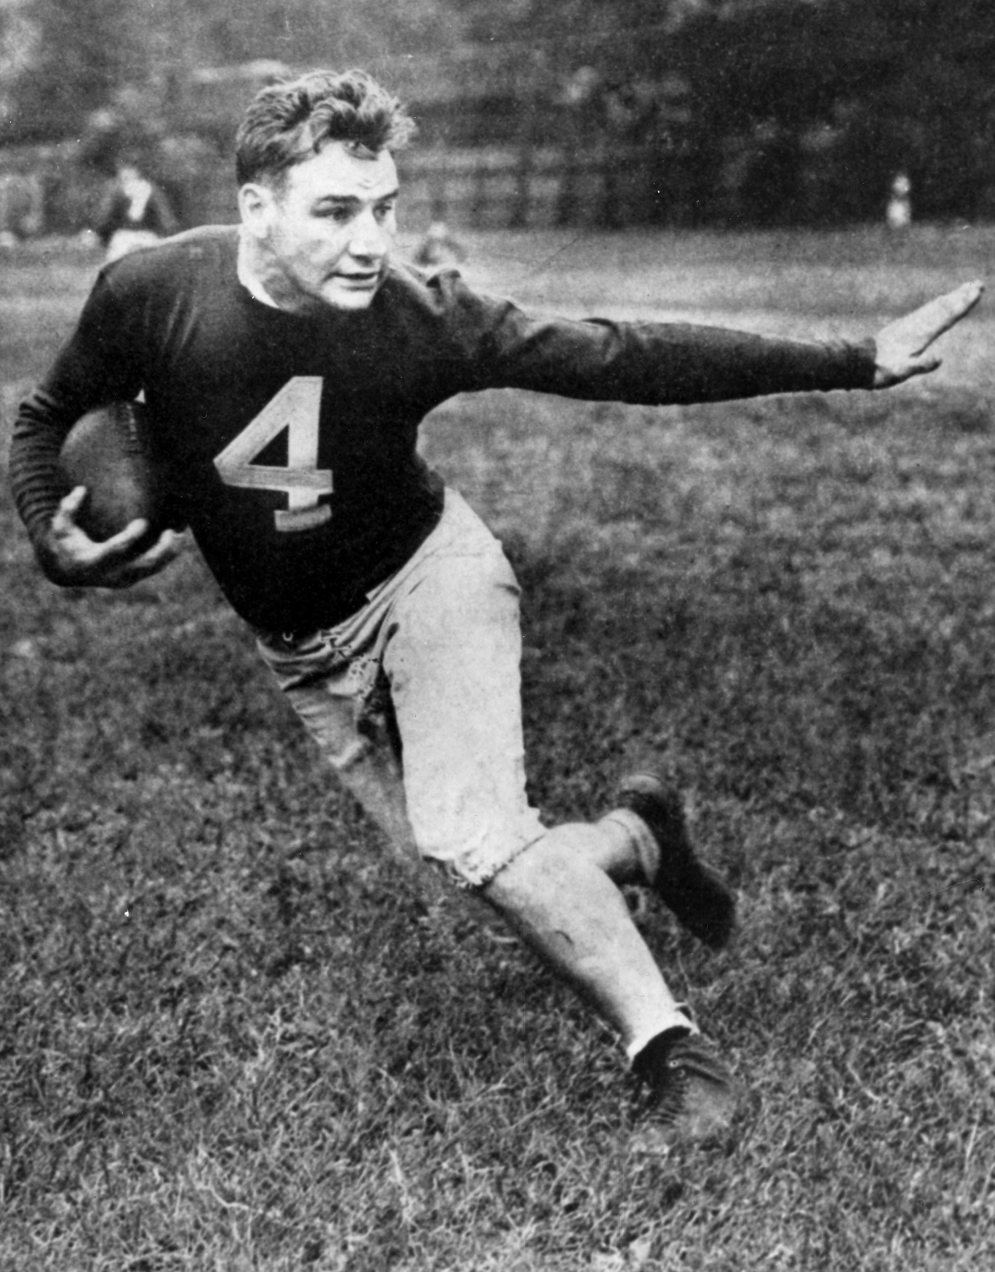 The New York Giants drafted&#160;fullback Alphonse “Tuffy” Leemans in the second round of the first NFL draft, after Wellington Mara, son of team owner, Tim Mara, watched Leemans star in a college game. Three seasons later, Leemans led the Giants to the 1938 NFL championship.&#160;